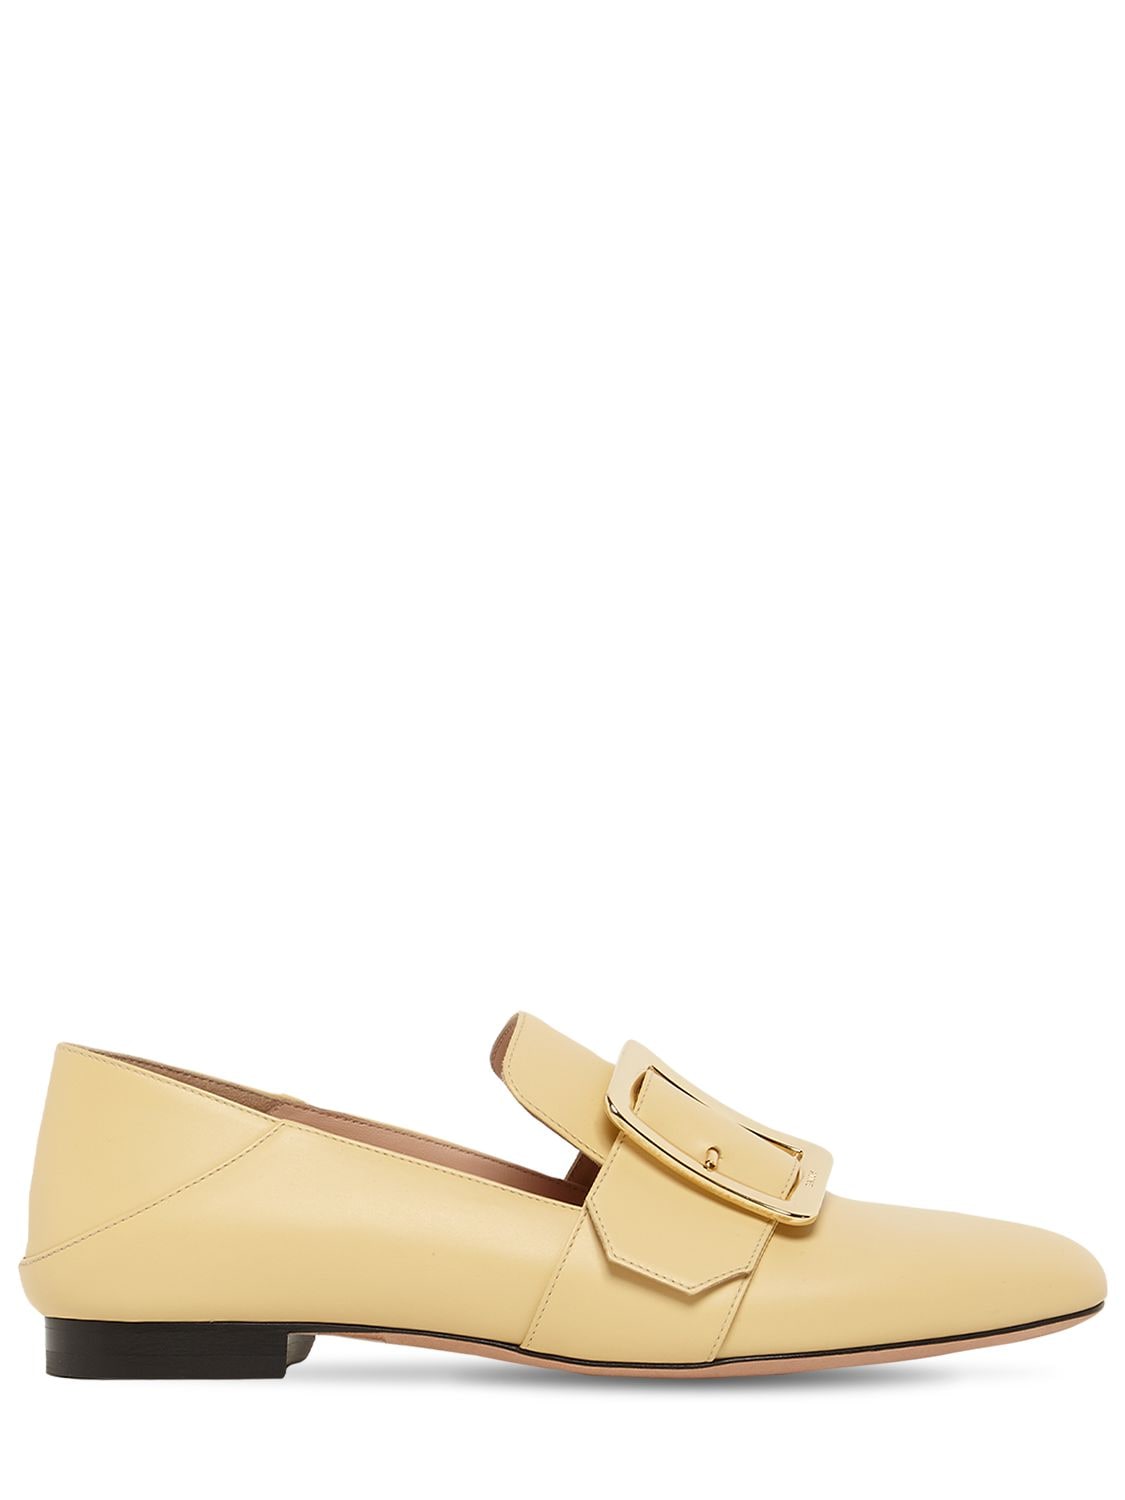 Bally - 10mm janelle leather loafers - Yellow | Luisaviaroma